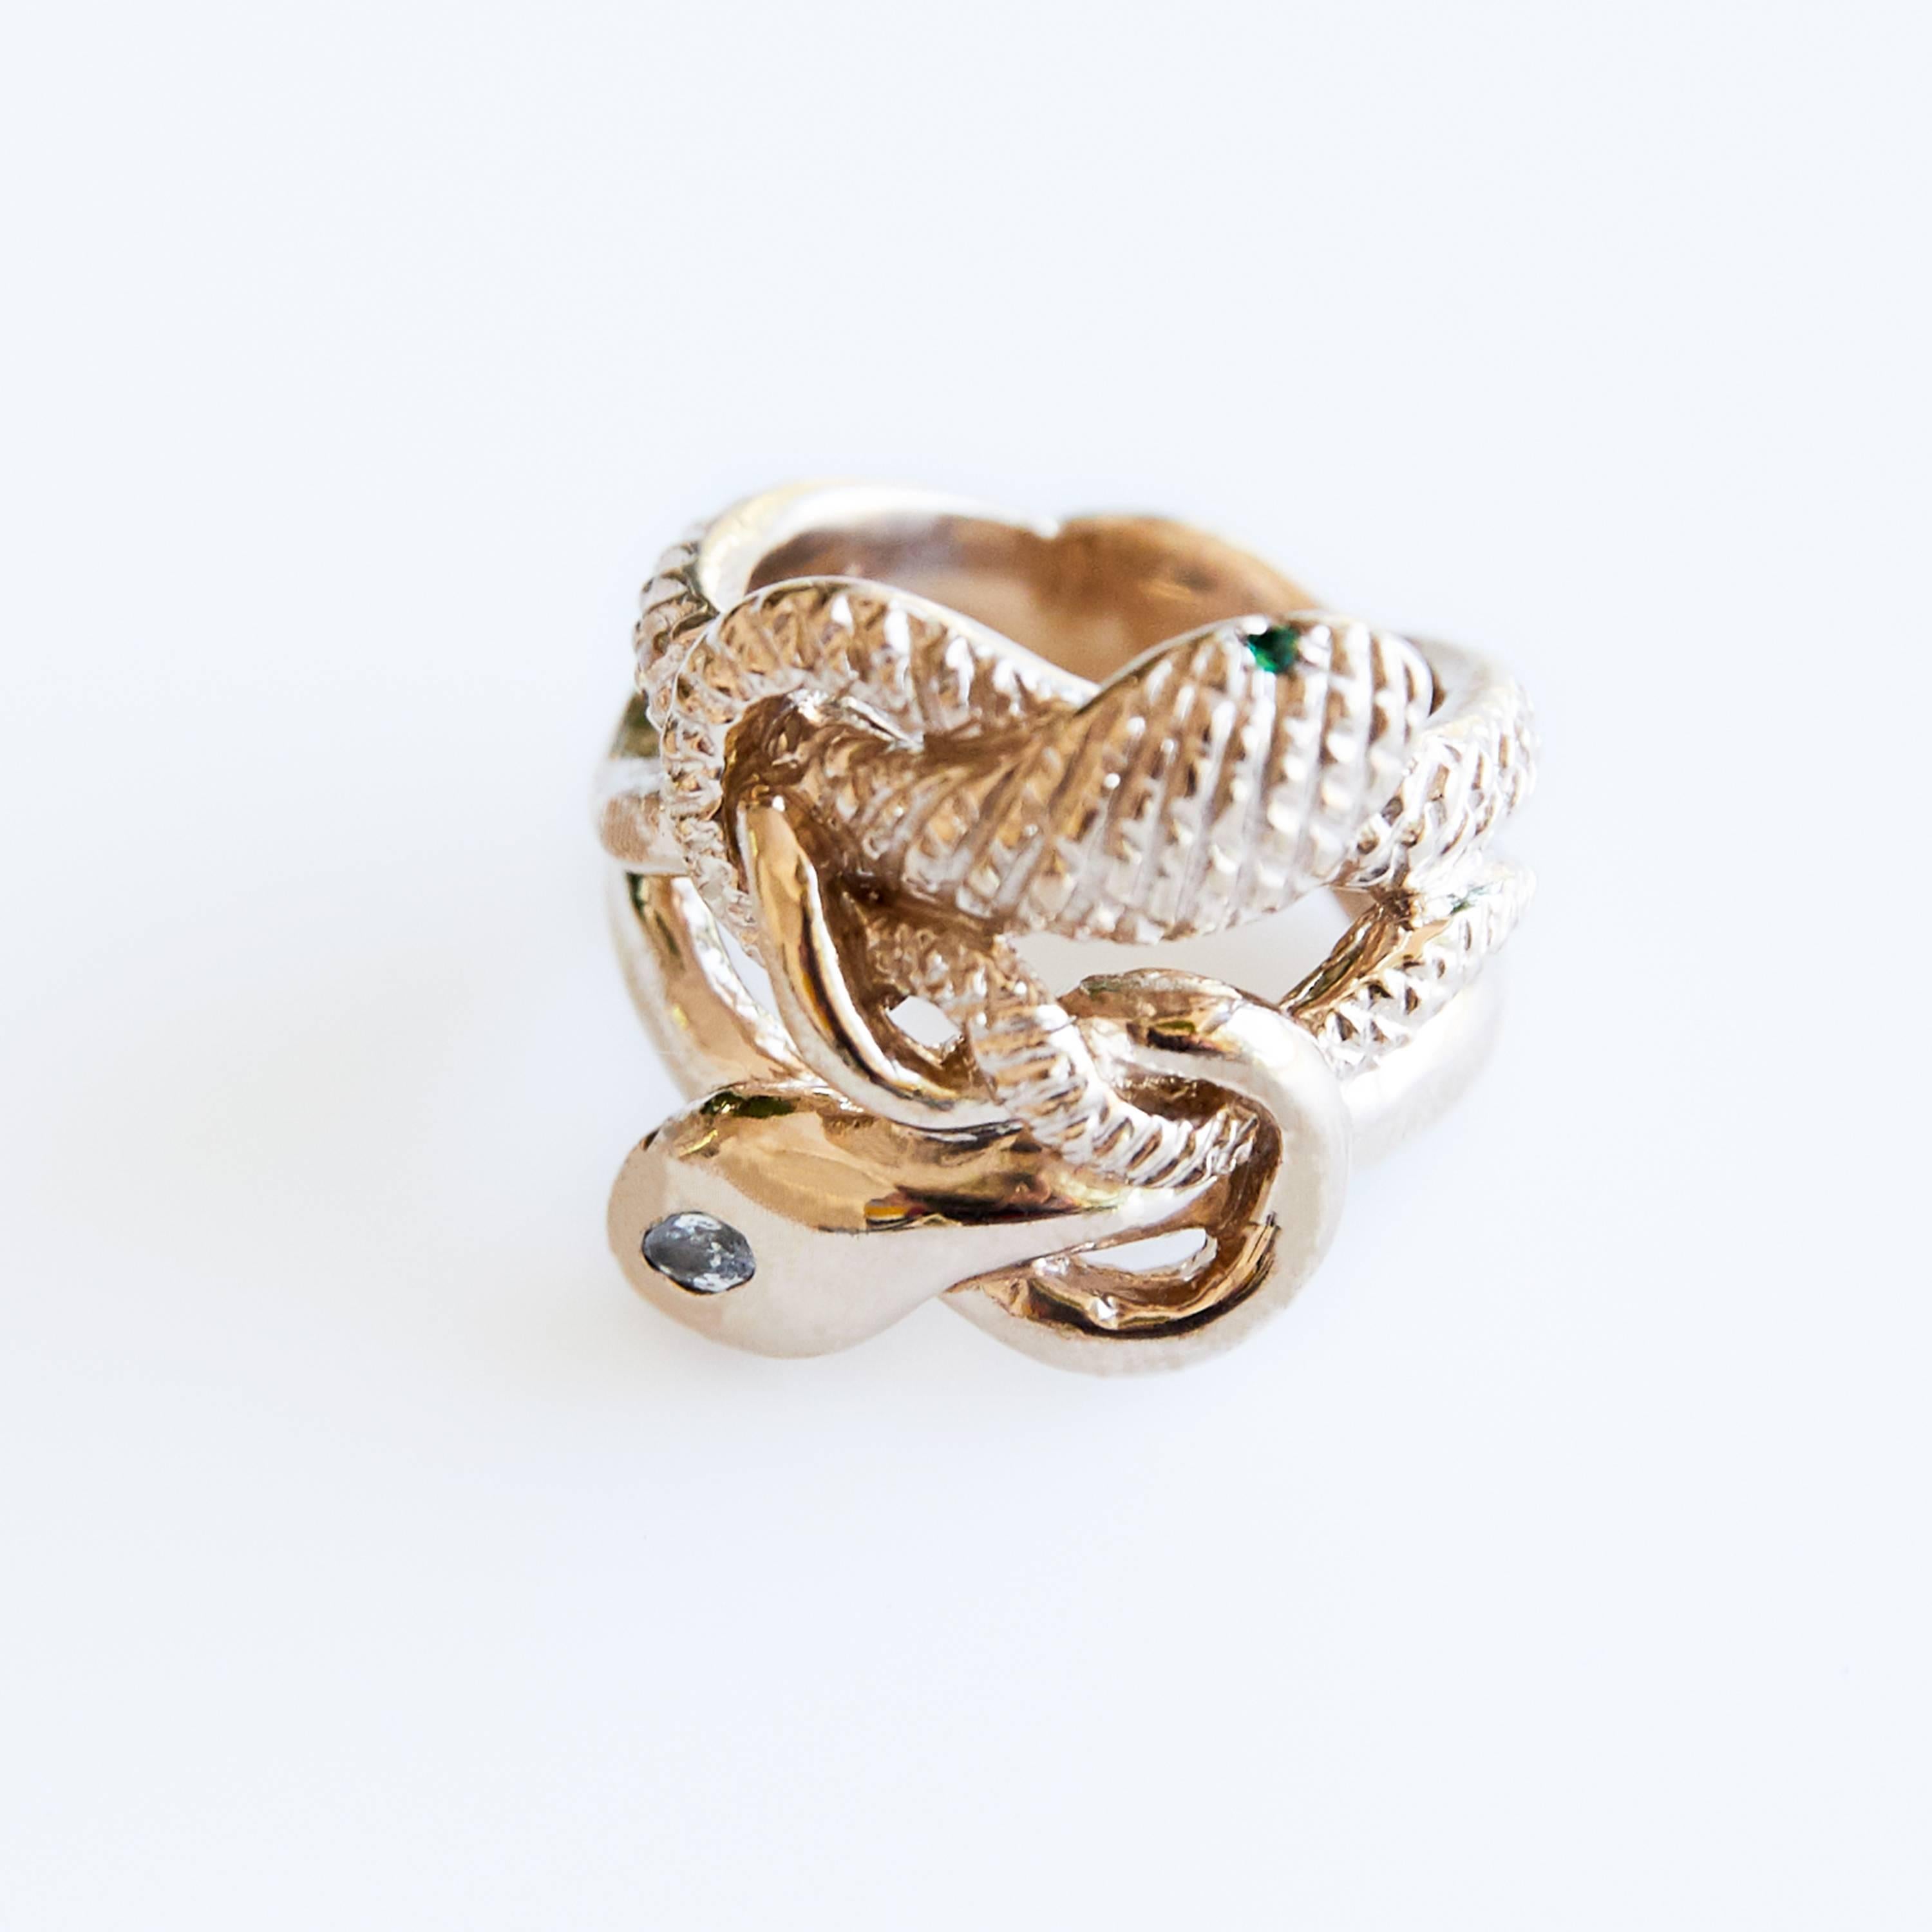 Brilliant Cut Sapphire White Diamond Ruby Snake Statement Ring Cocktail Ring Bronze J Dauphin For Sale